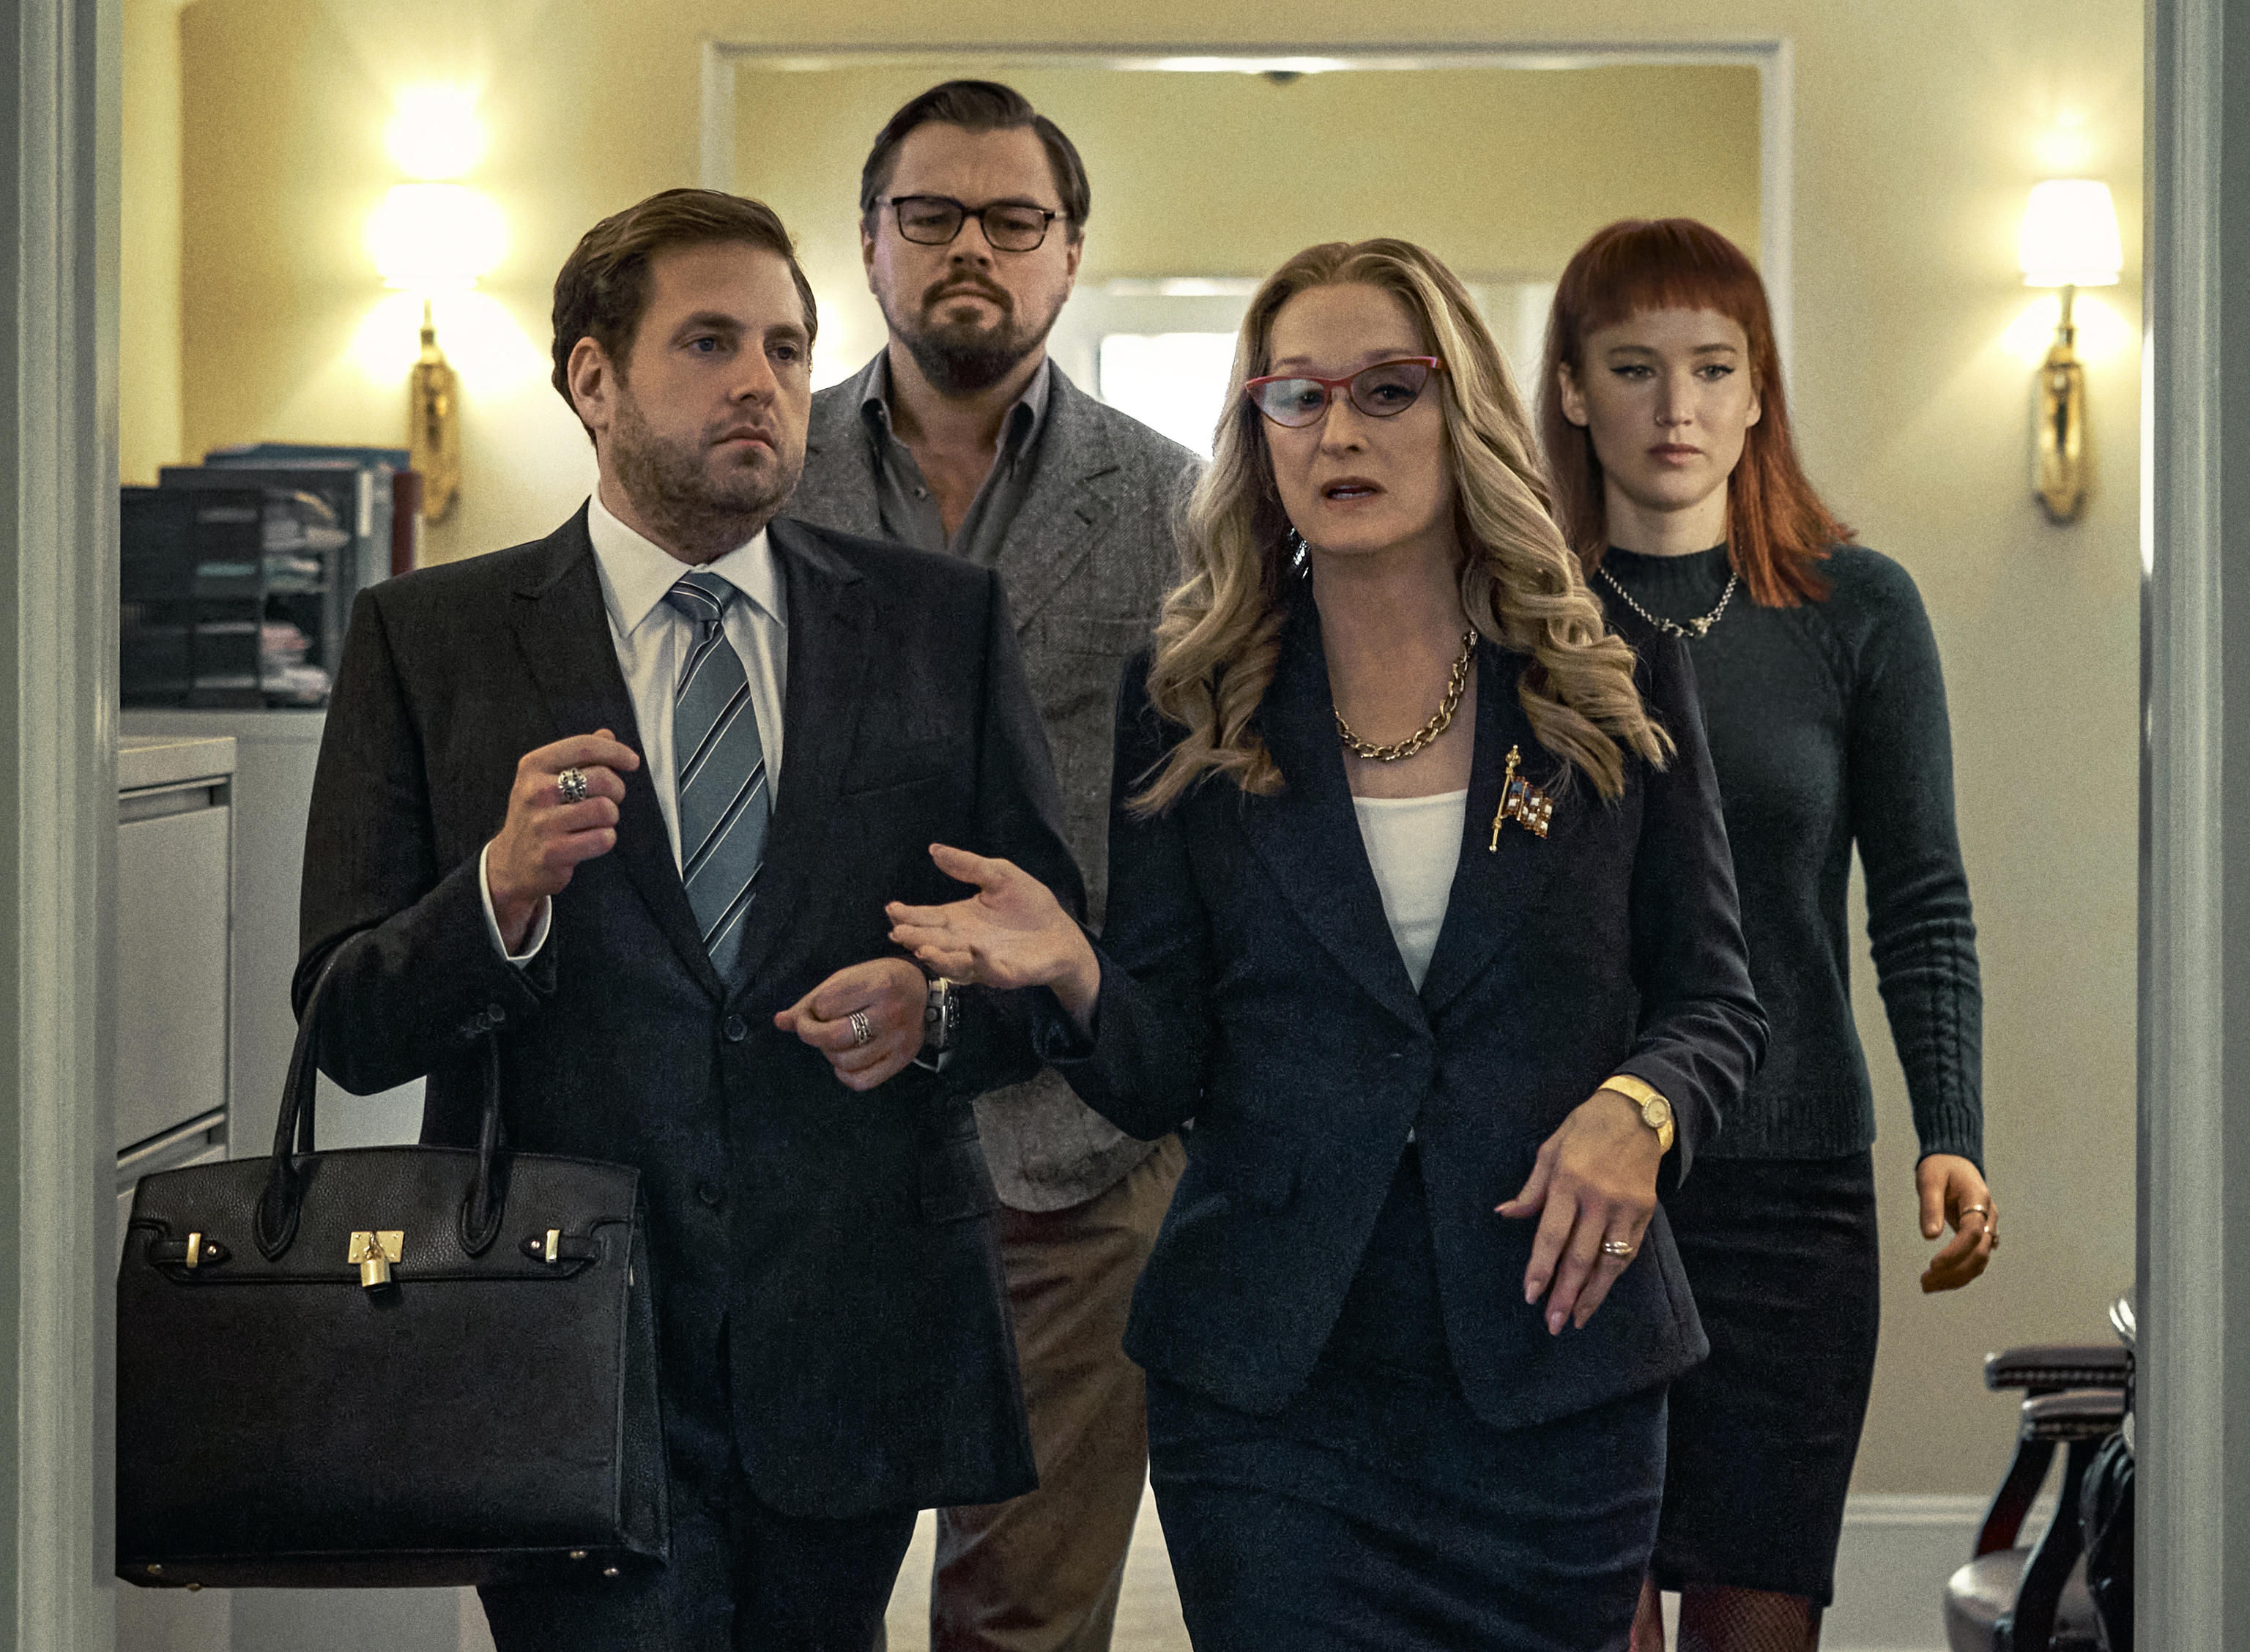 This image releases Jonah Hill, Leonardo DiCaprio, Meryl Streep and Jennifer Lawrence in a 'Don't Look Up' moment.